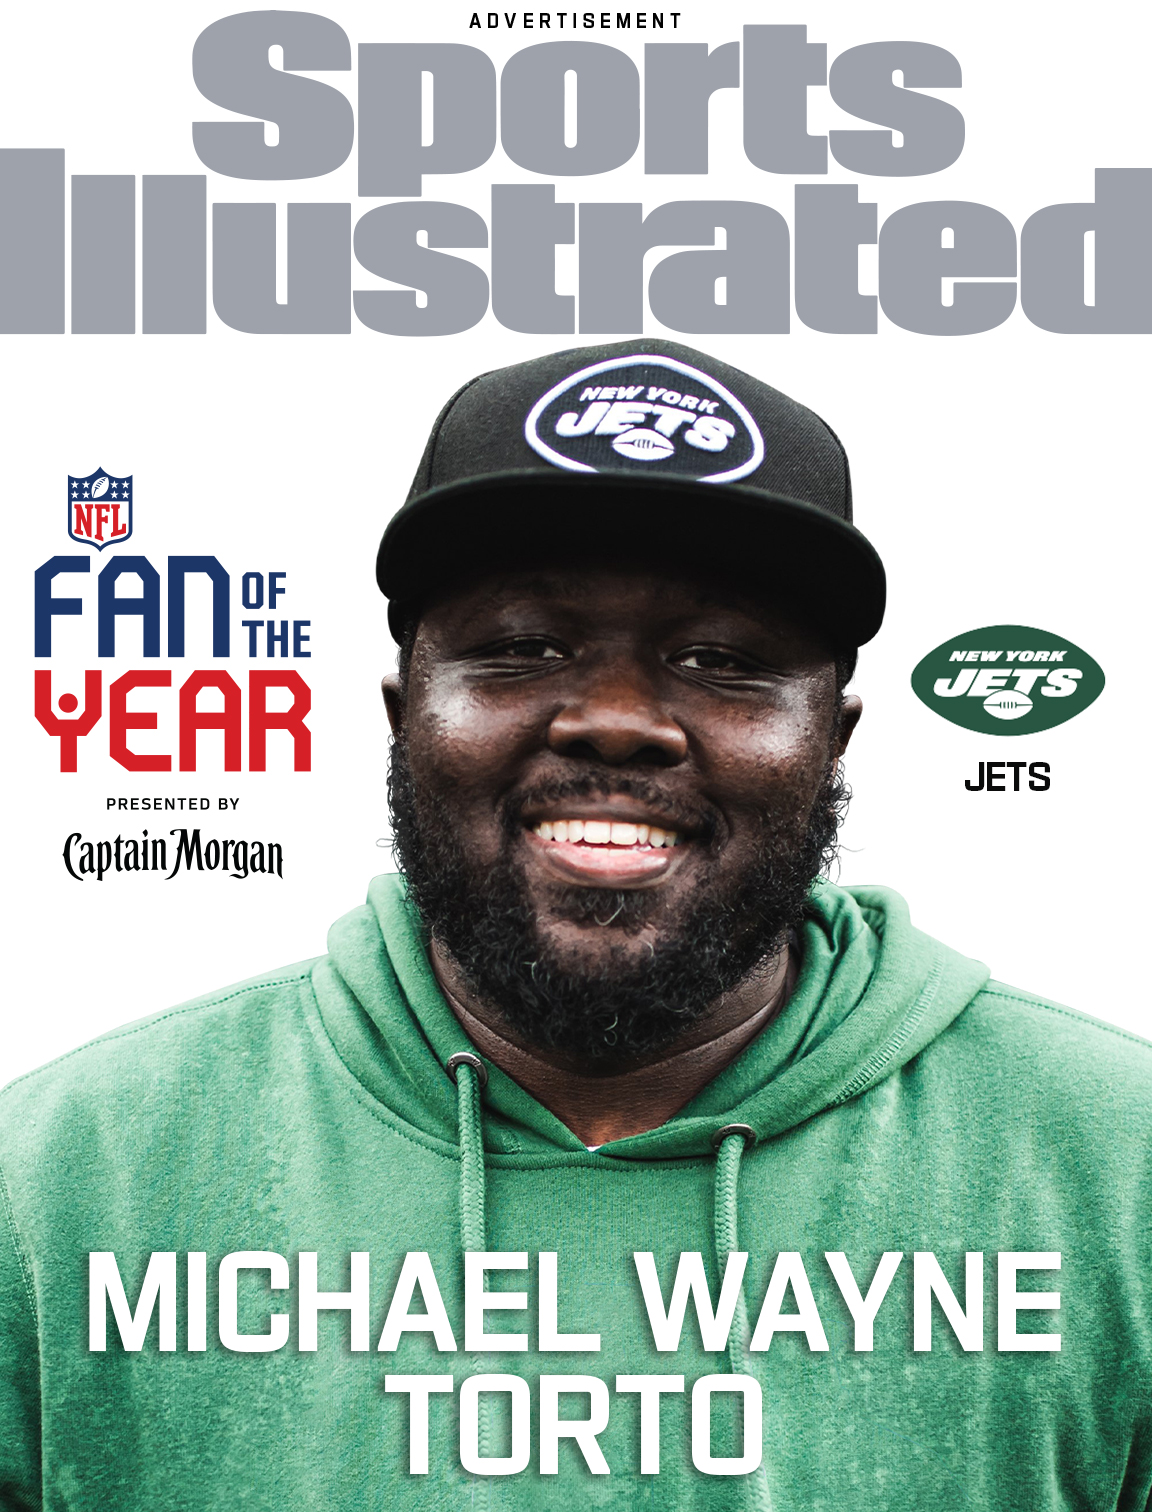 New York Jets Fan of the Year Michael Wayne Torto will appear in a high-impact cover peel ad execution and custom spread creative in the February issue of Sports Illustrated.